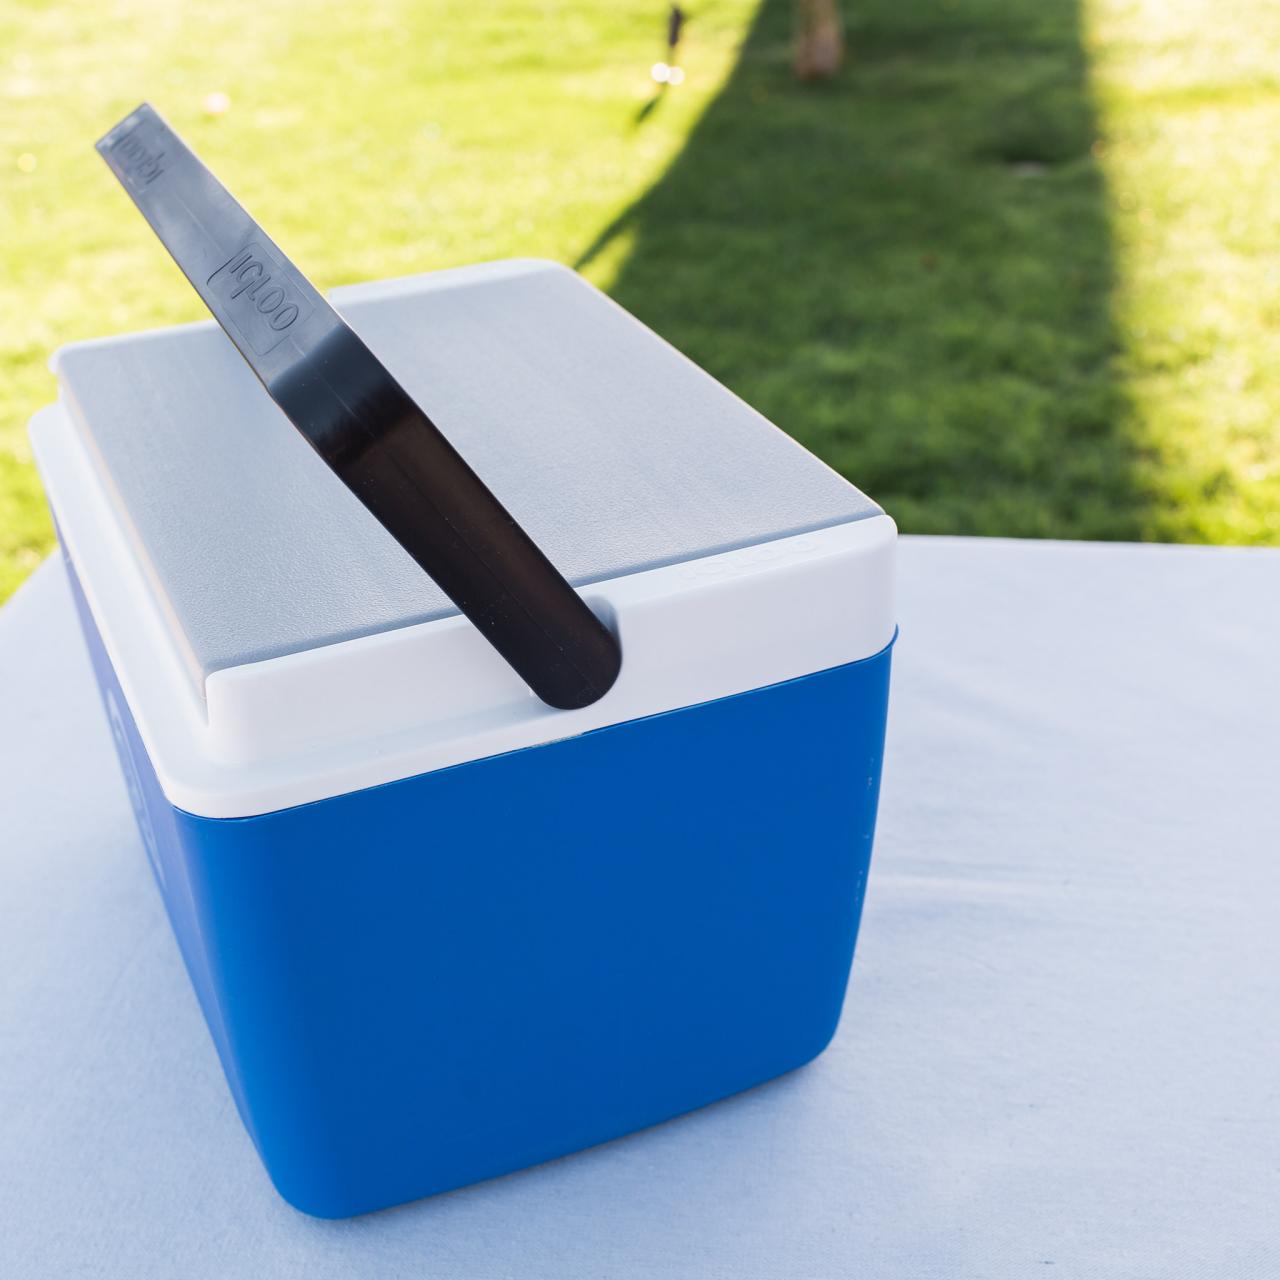 TikTok's Hack for Turning Your Cooler into a Hot Box